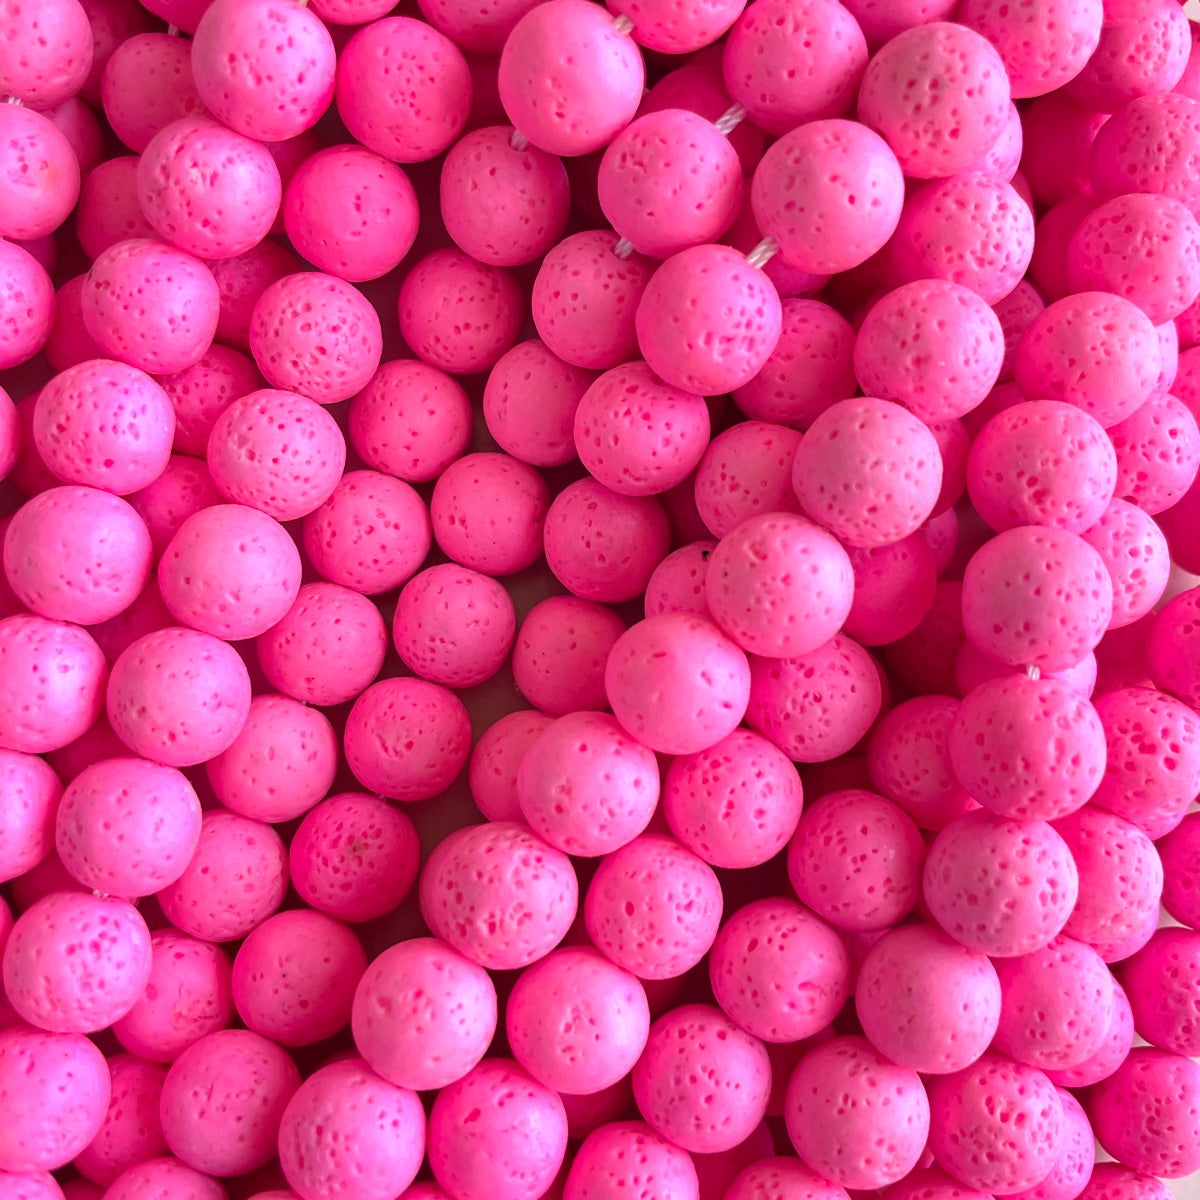 2 Strands/lot 10mm Hot Pink Fuchsia Lave Stone Round Beads Stone Beads Breast Cancer Awareness New Beads Arrivals Other Stone Beads Charms Beads Beyond